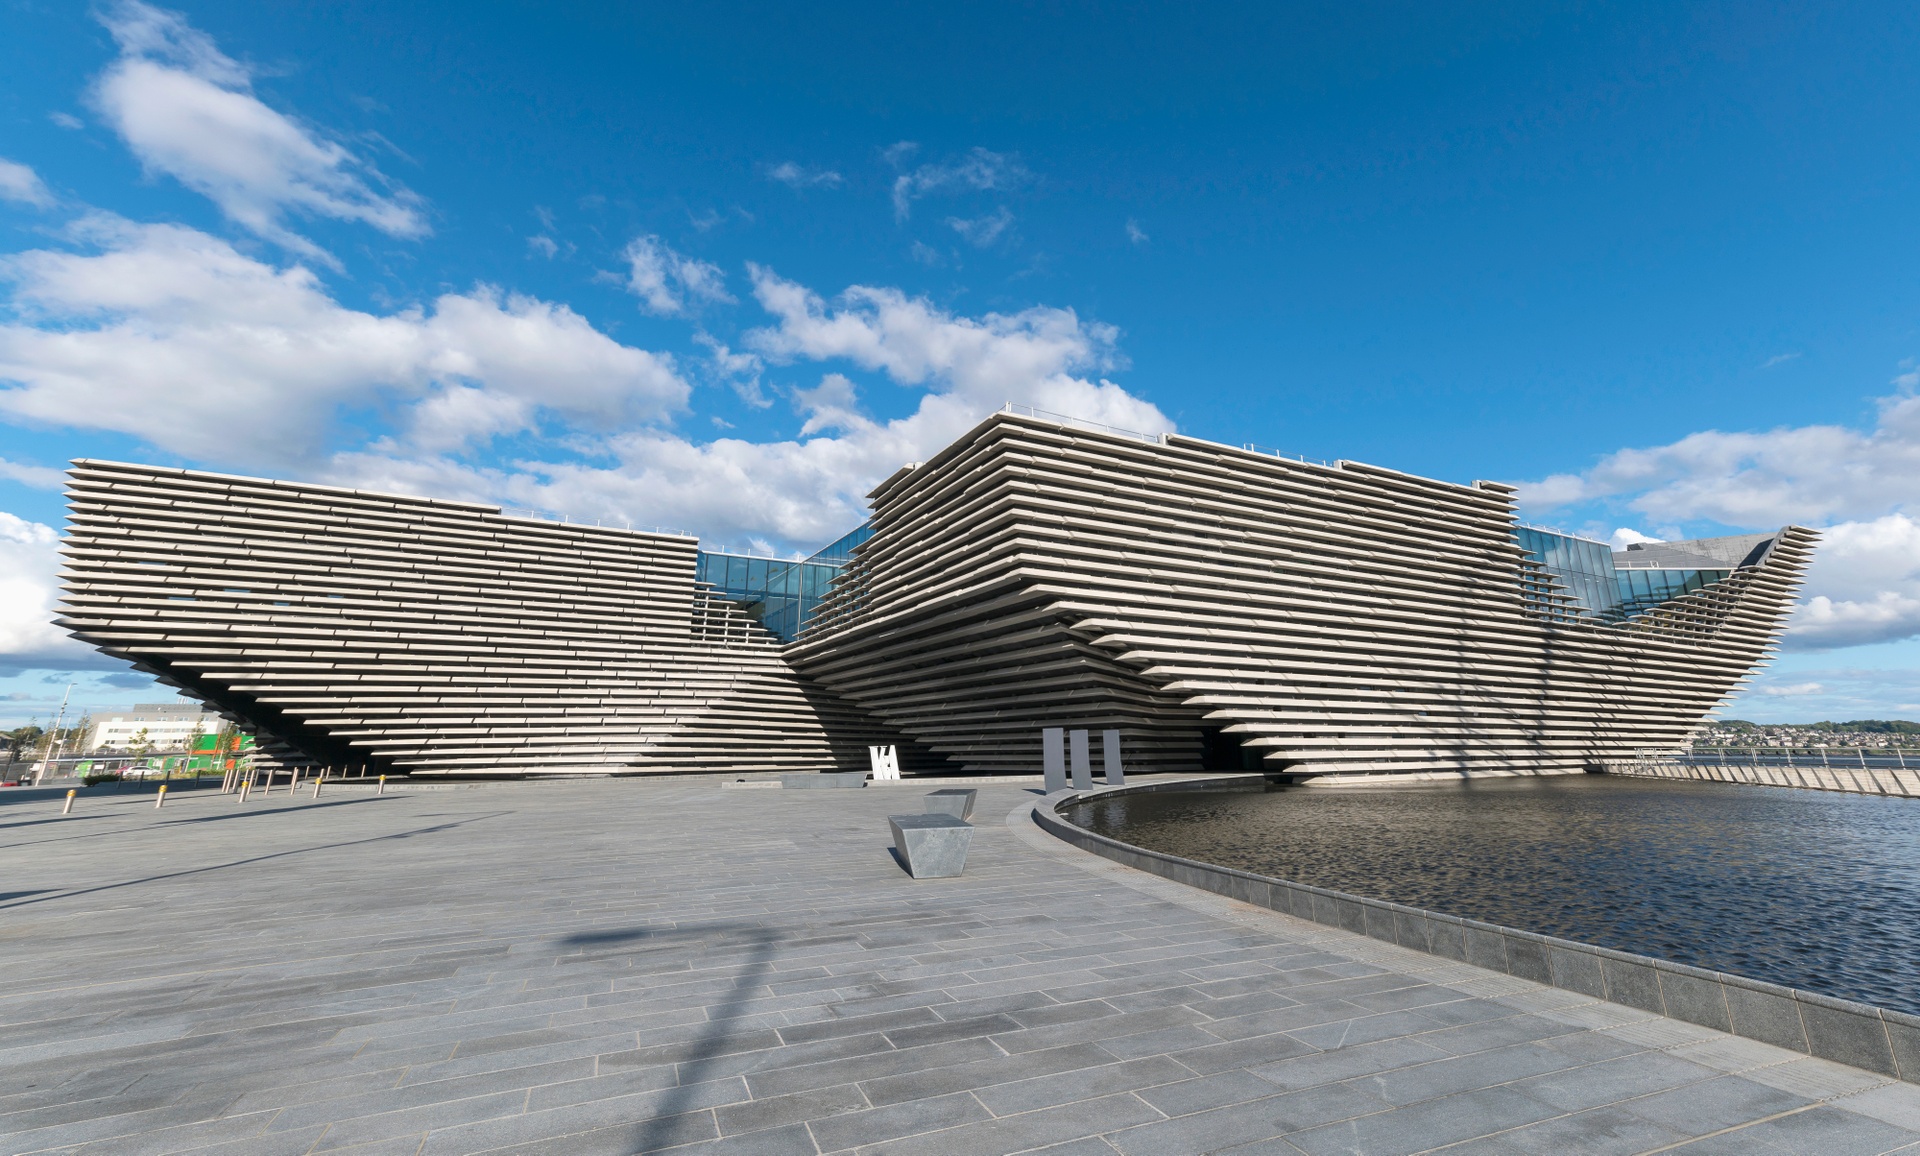 V&A Dundee museum building on a clear sunny day